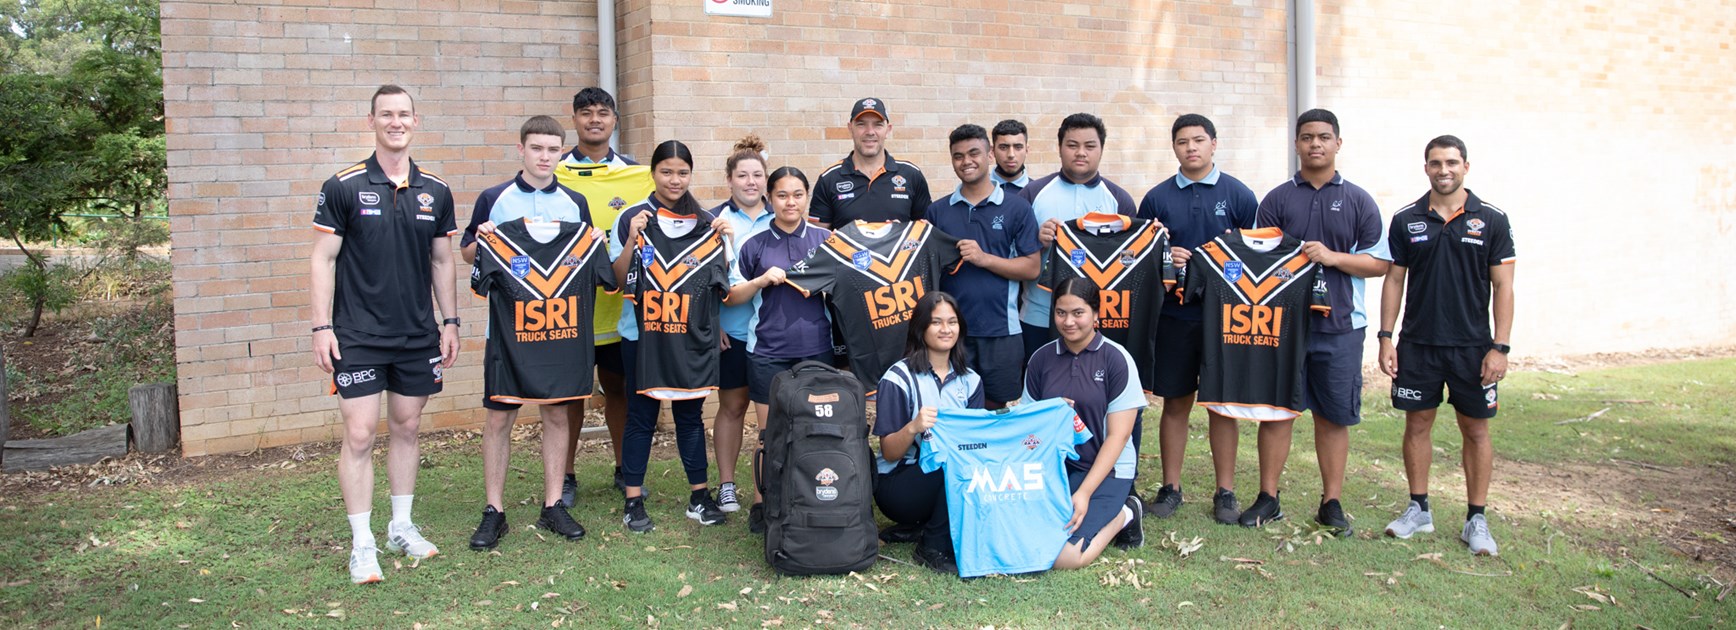 Wests Tigers Foundation grow grassroots rugby league in local high schools